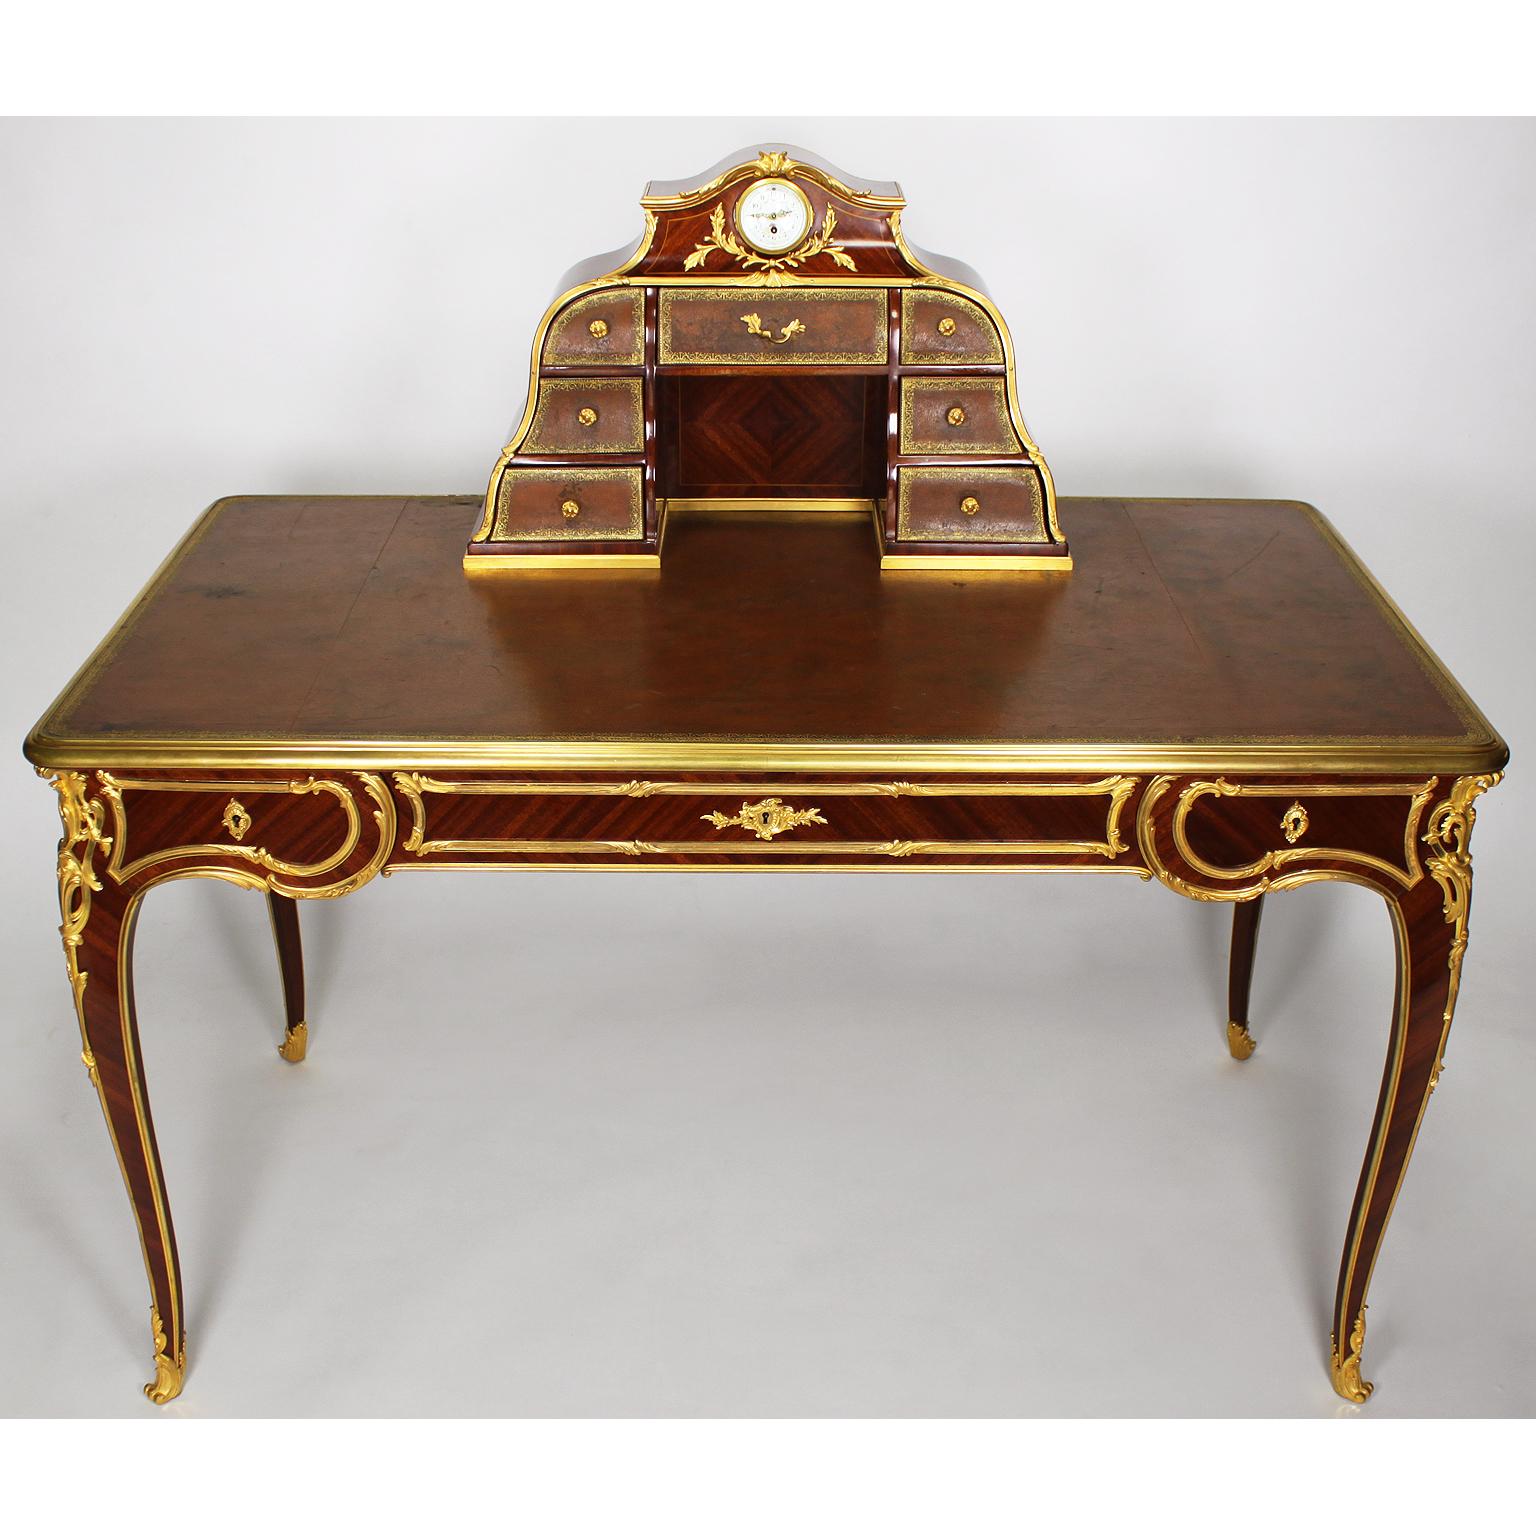 A very fine French 19th century Louis XV style bureau plat (Desk - Writing Table - Ladies Desk) Cartonnier by Antoine Krieger, the quarter-veneer satiné with fruitwood stringing, the cartonnier set with a circular timepiece above seven gilt-tooled